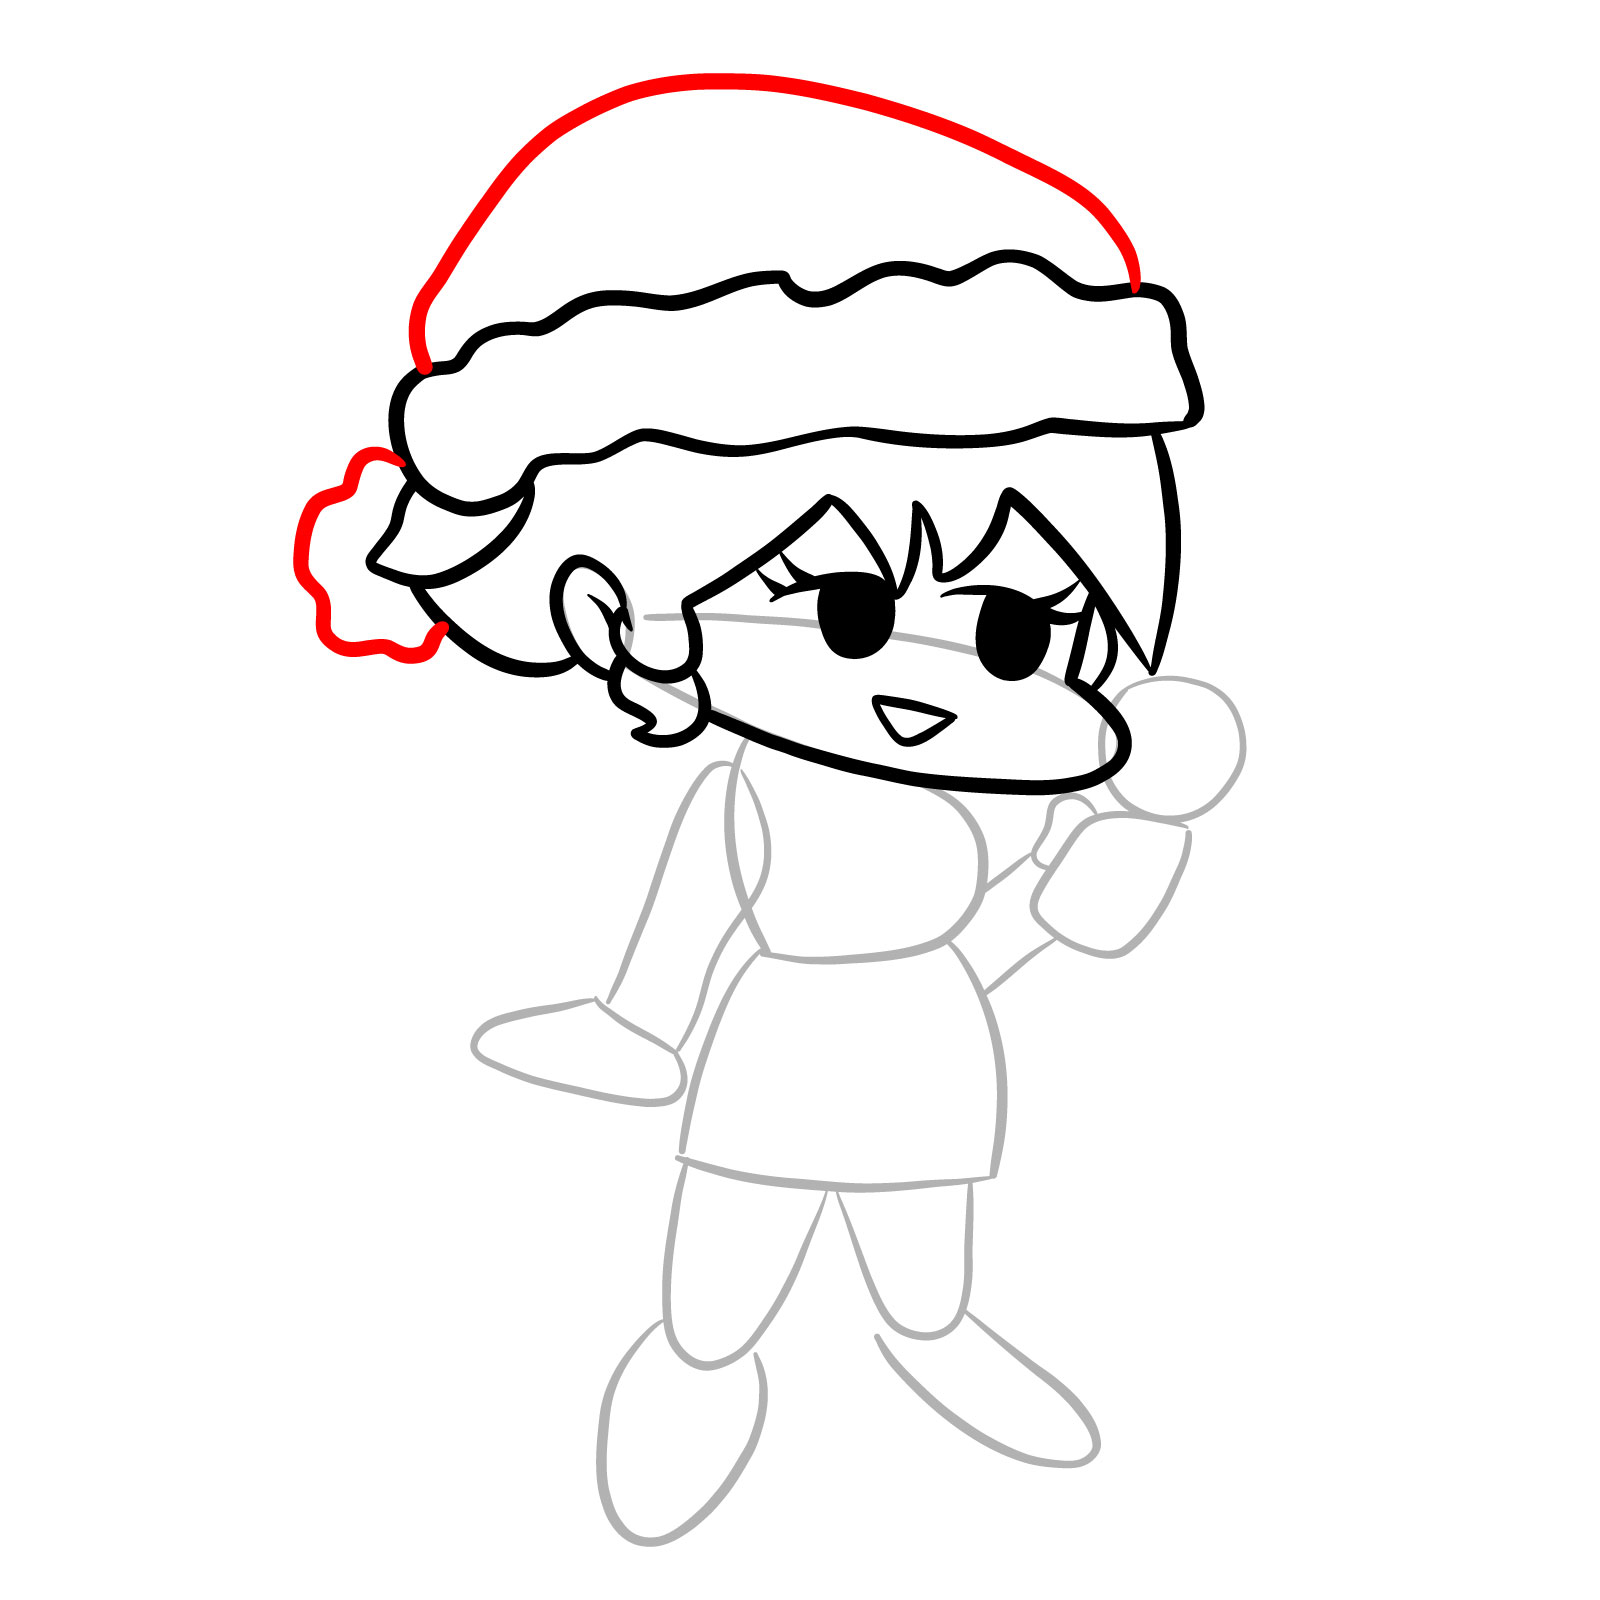 How to draw standing Santa GF - step 12